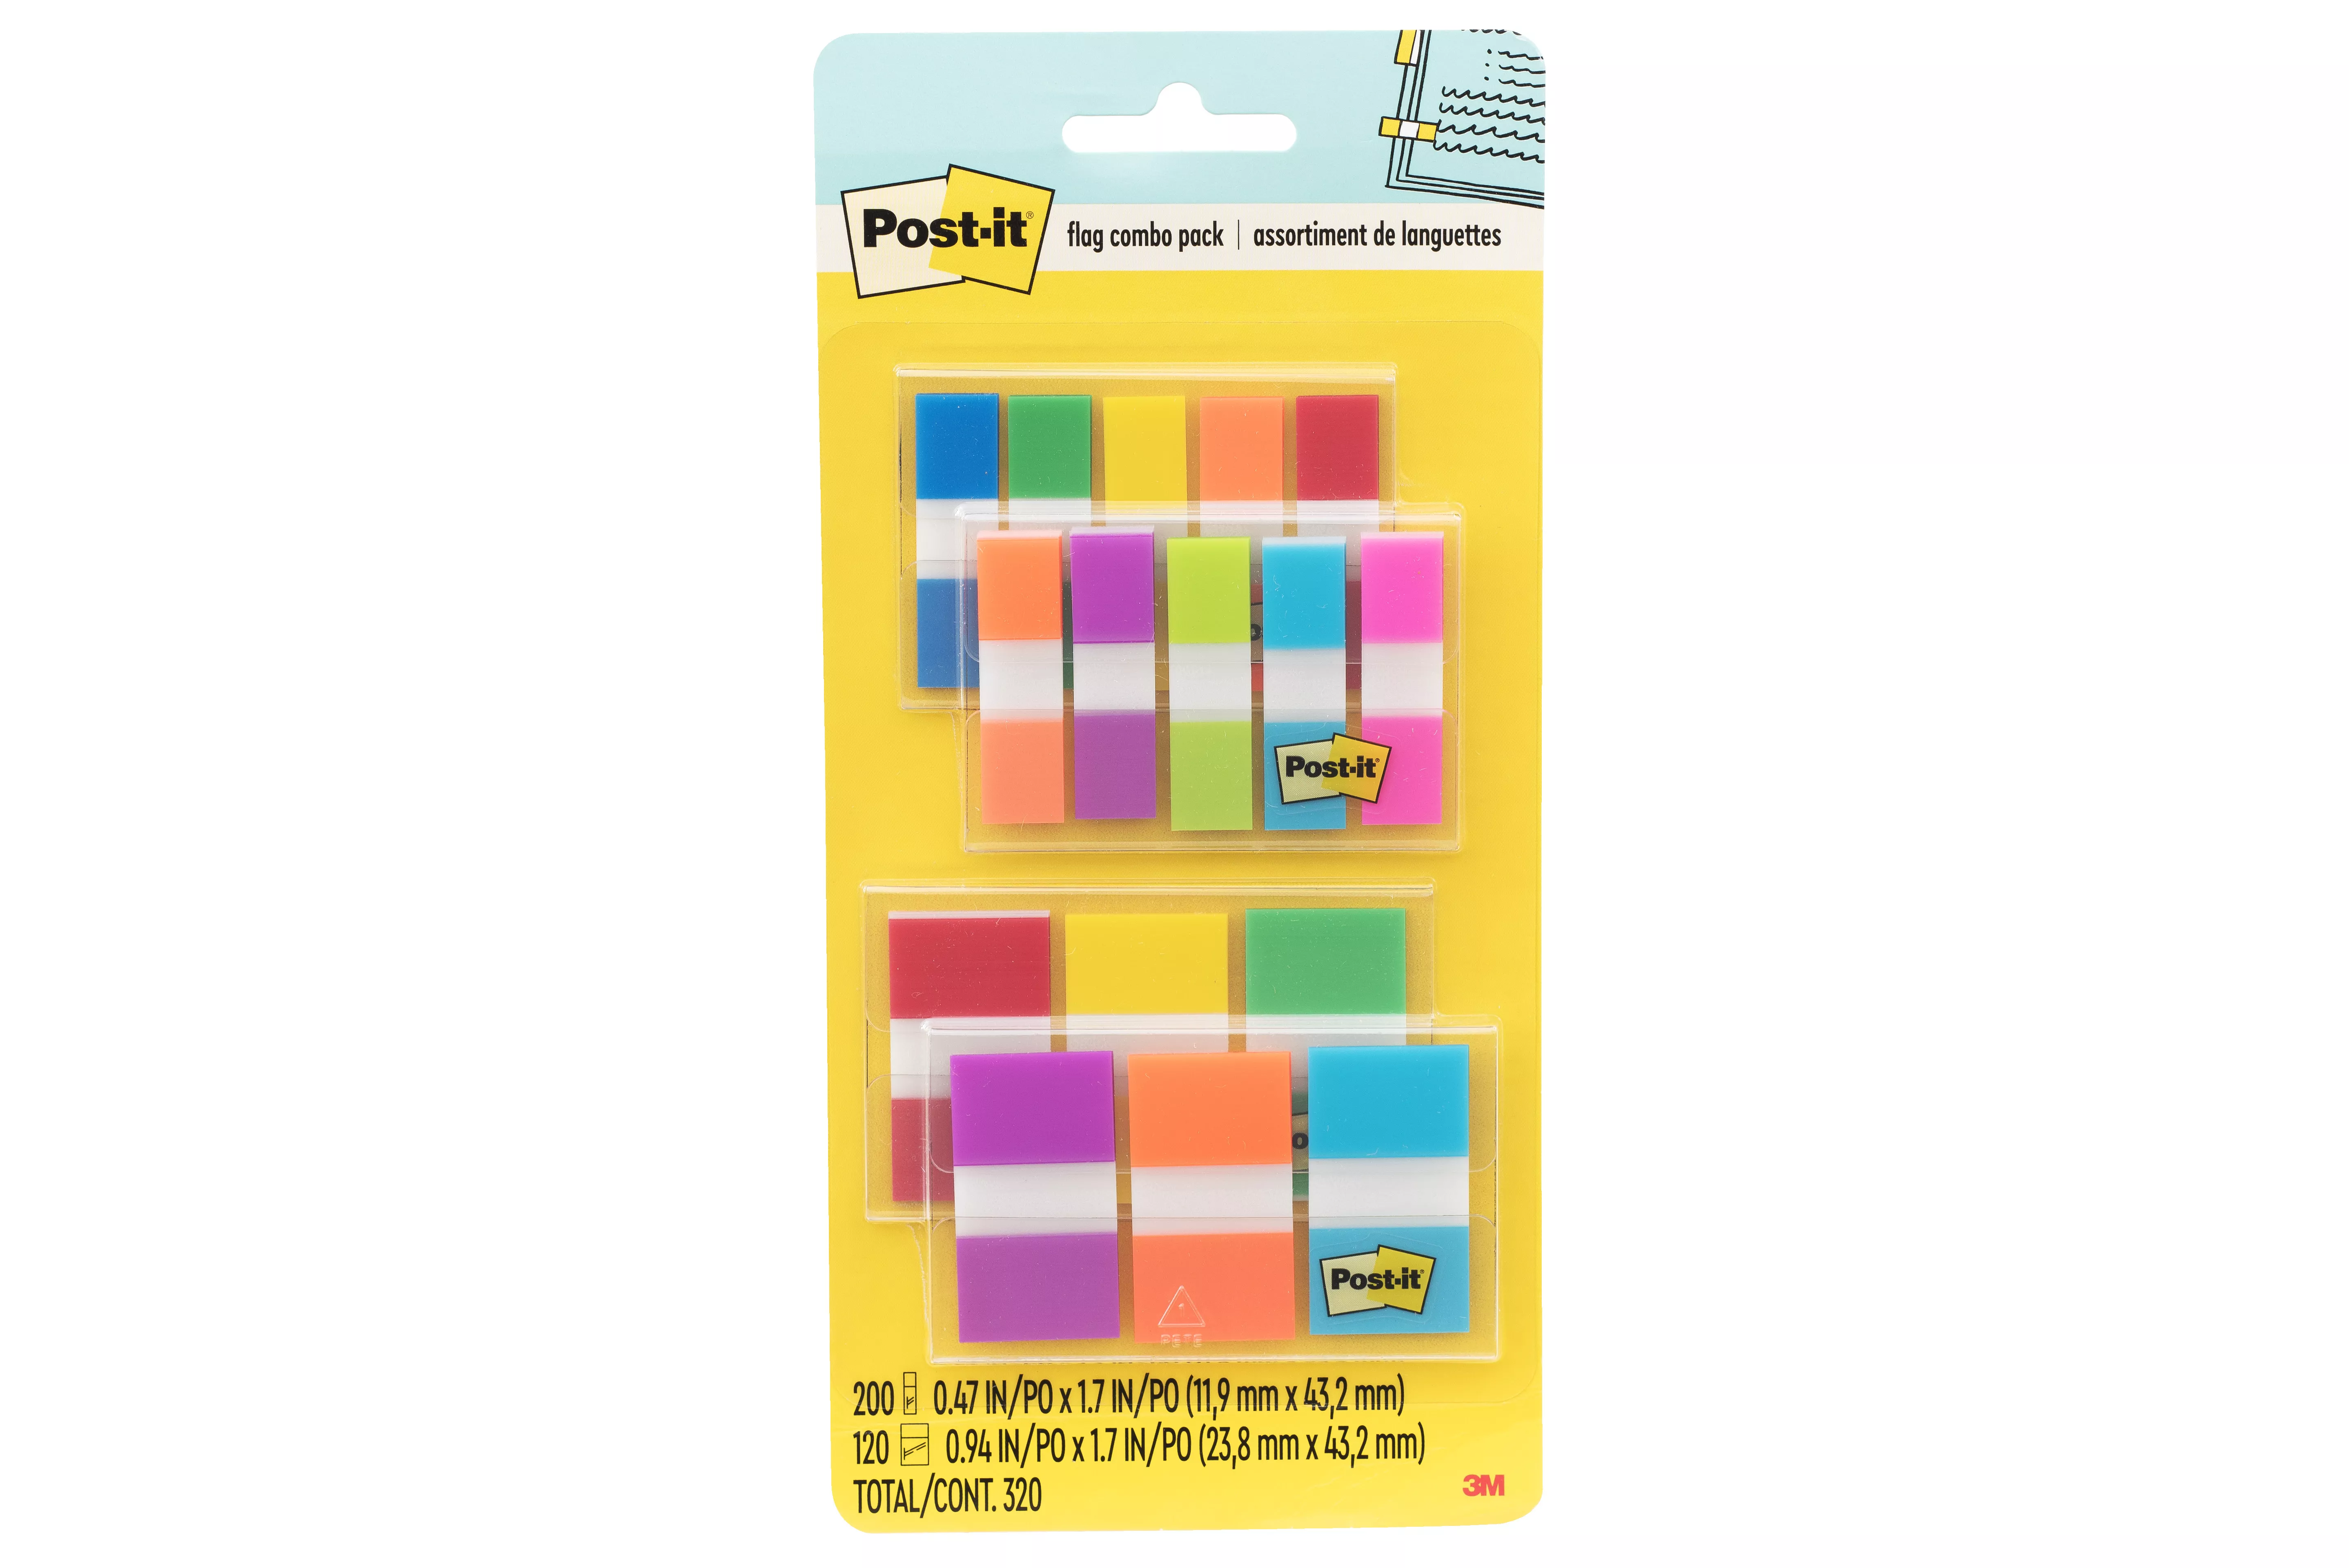 Post-it® Flags 683-XL1 Combo Pack, .47 in. x 1.7 in. flags and .94 in. x 1.7 in. flags